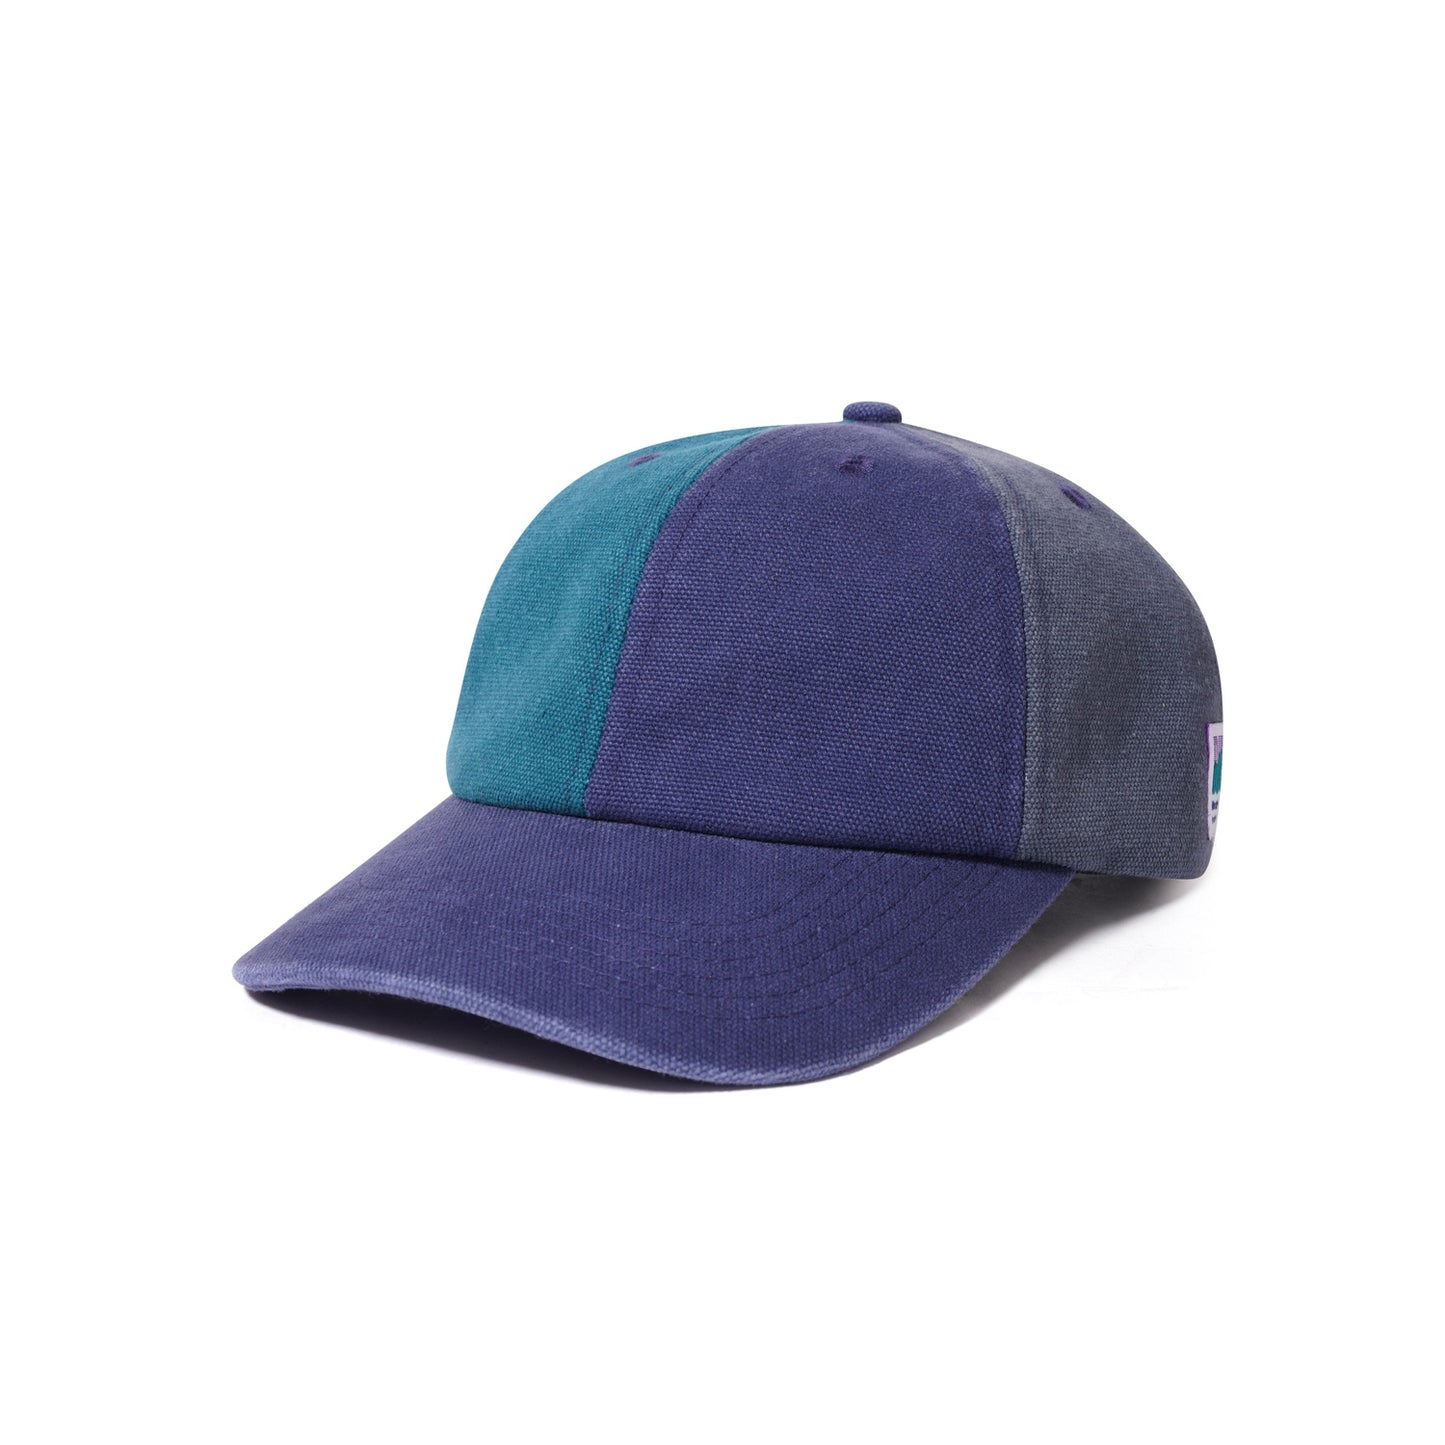 Canvas Patchwork 6 Panel Cap - Washed Navy